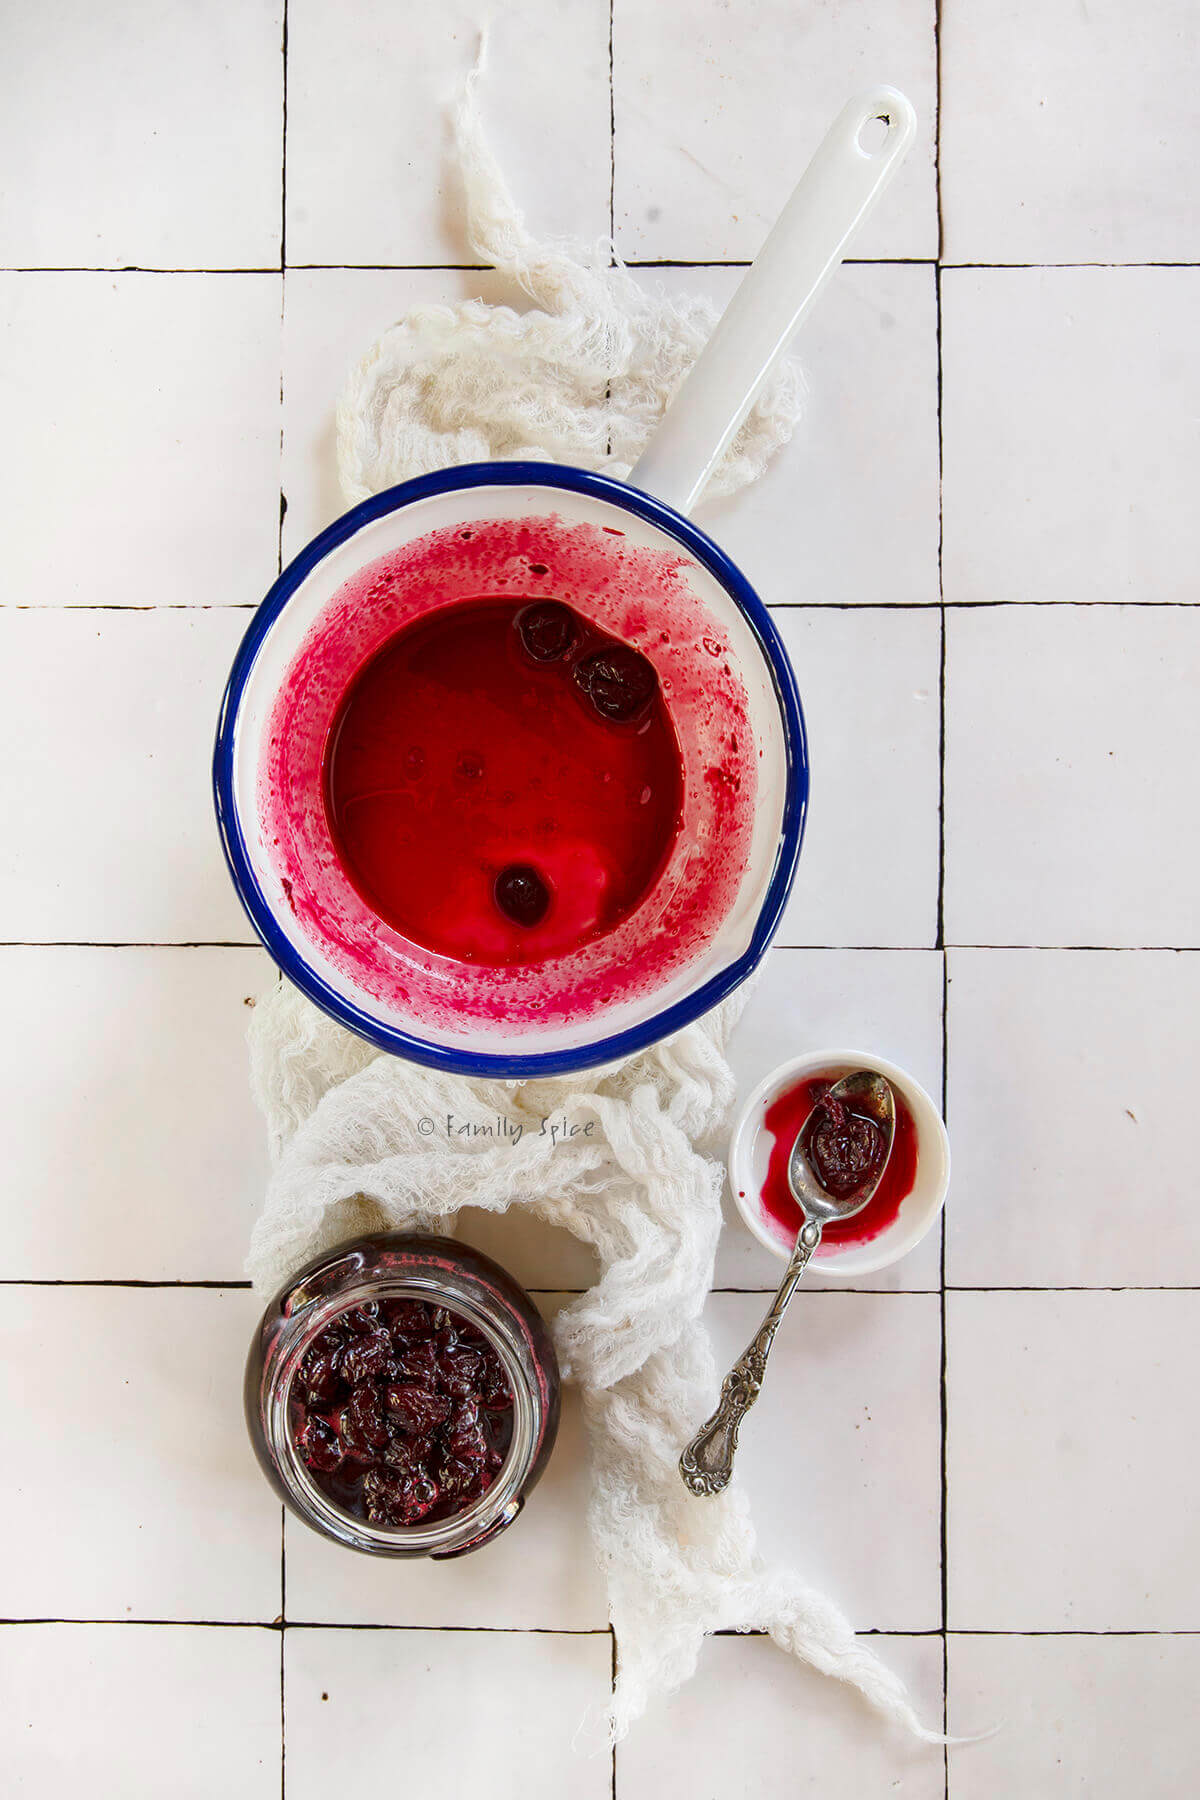 A white enamel pot stained with sour cherry jam juice and a jar of jam next to it